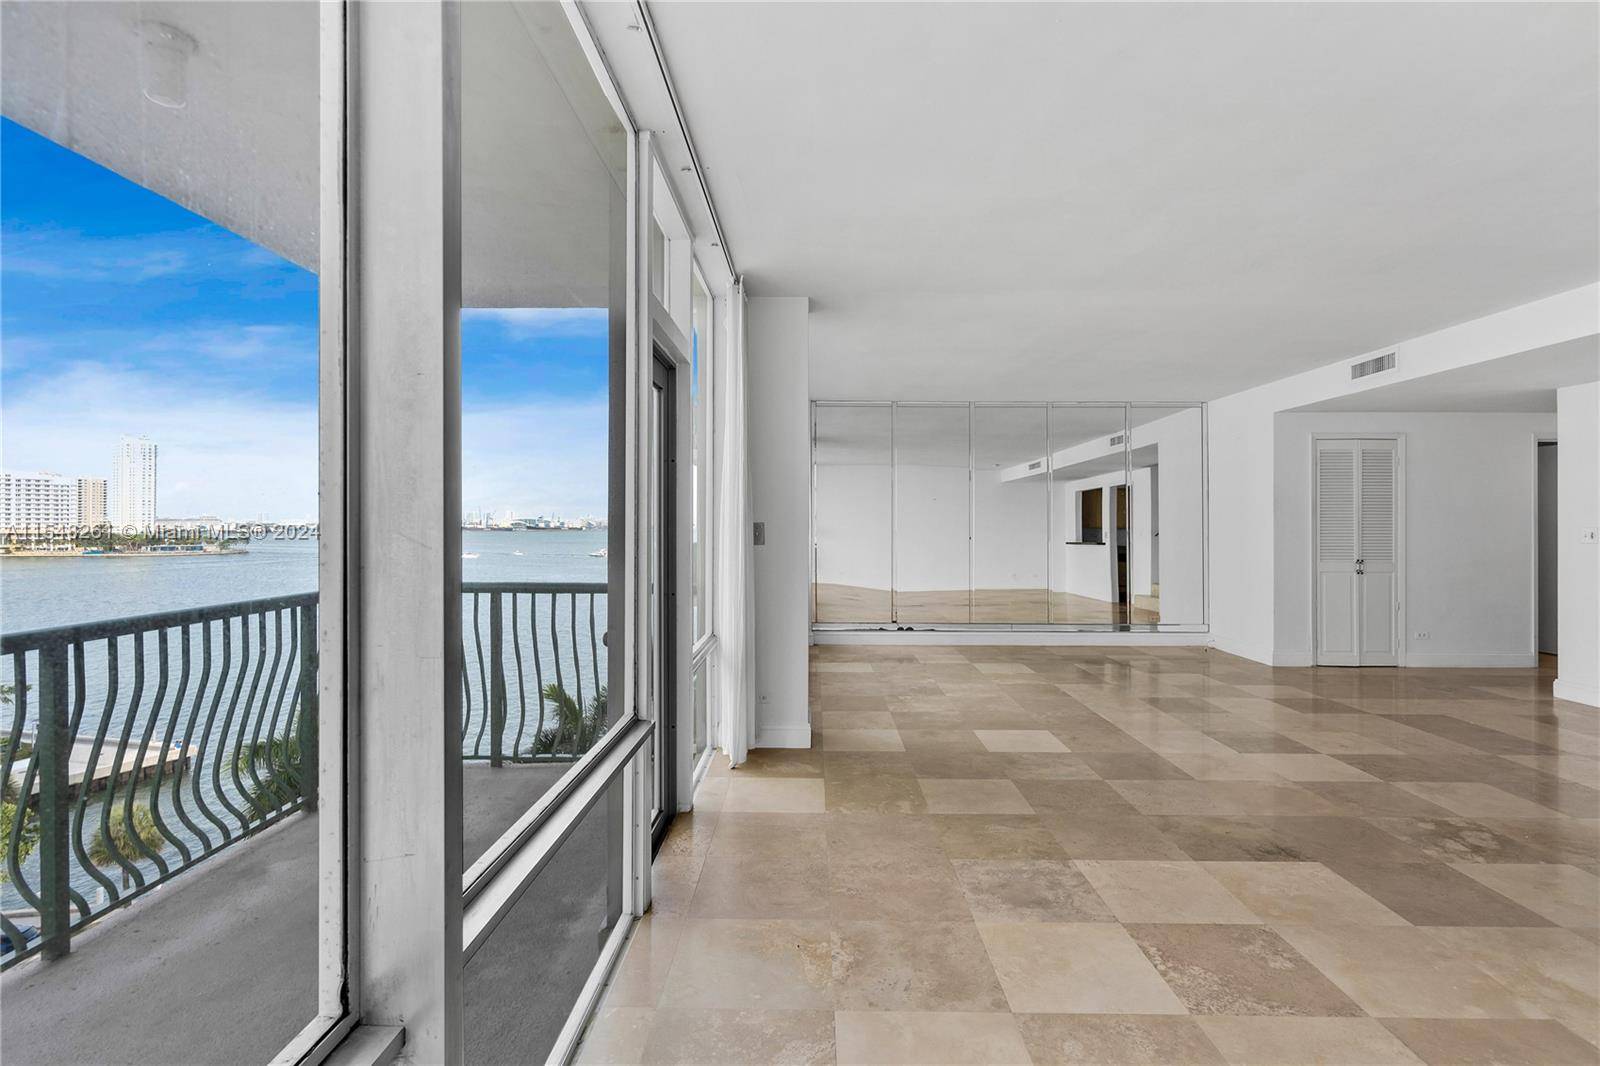 Introducing a unique rental opportunity in a boutique and quiet building located in the coveted Brickell Bay Drive, a hidden gem allowing you to enjoy the refreshing ocean breeze and ...